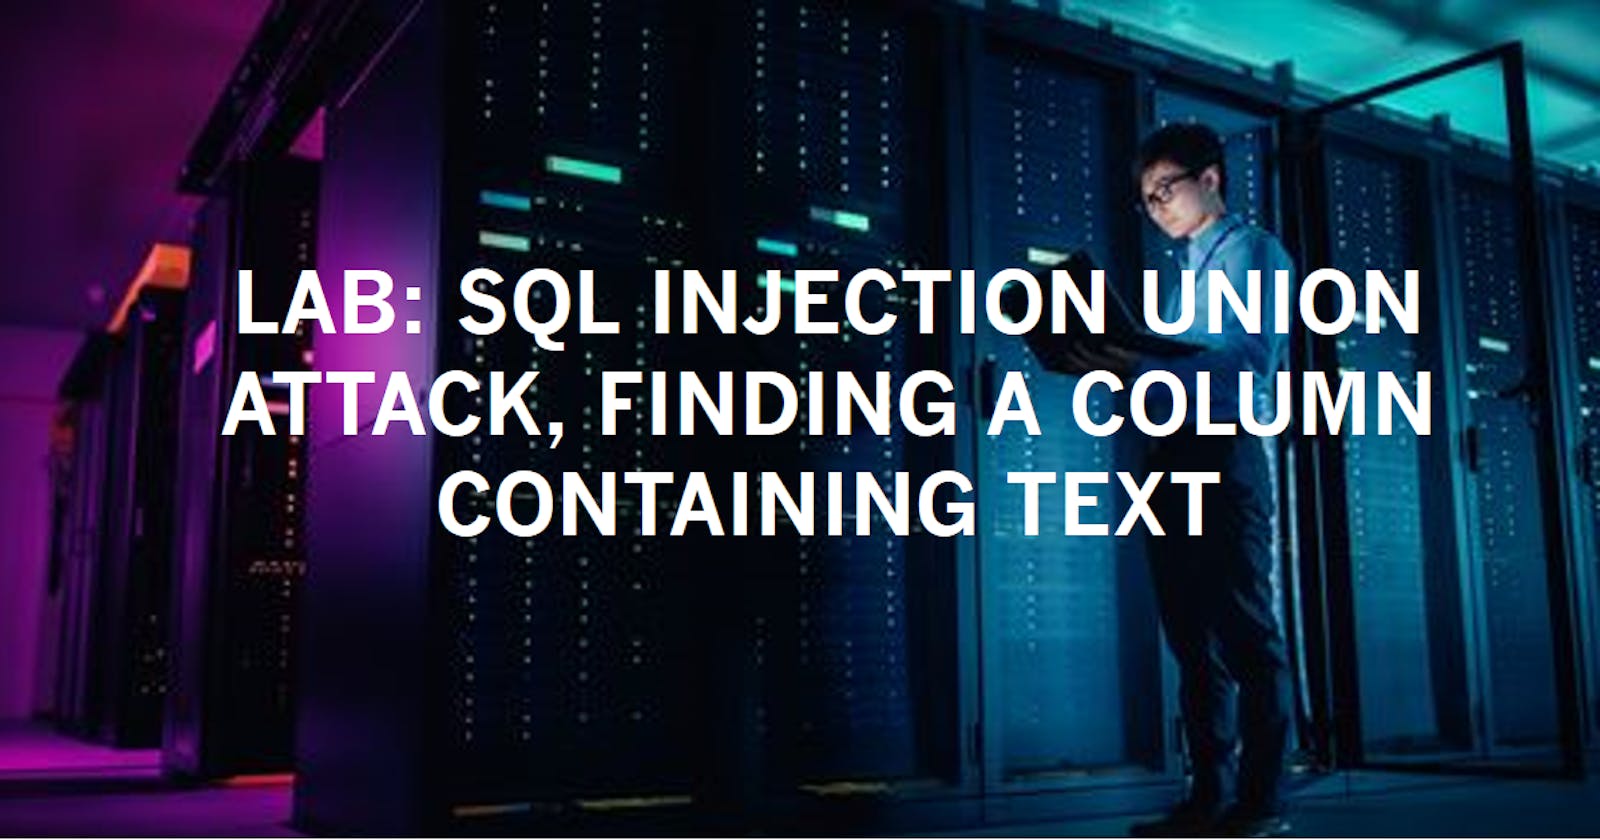 Lab: SQL injection UNION attack, finding a column containing text